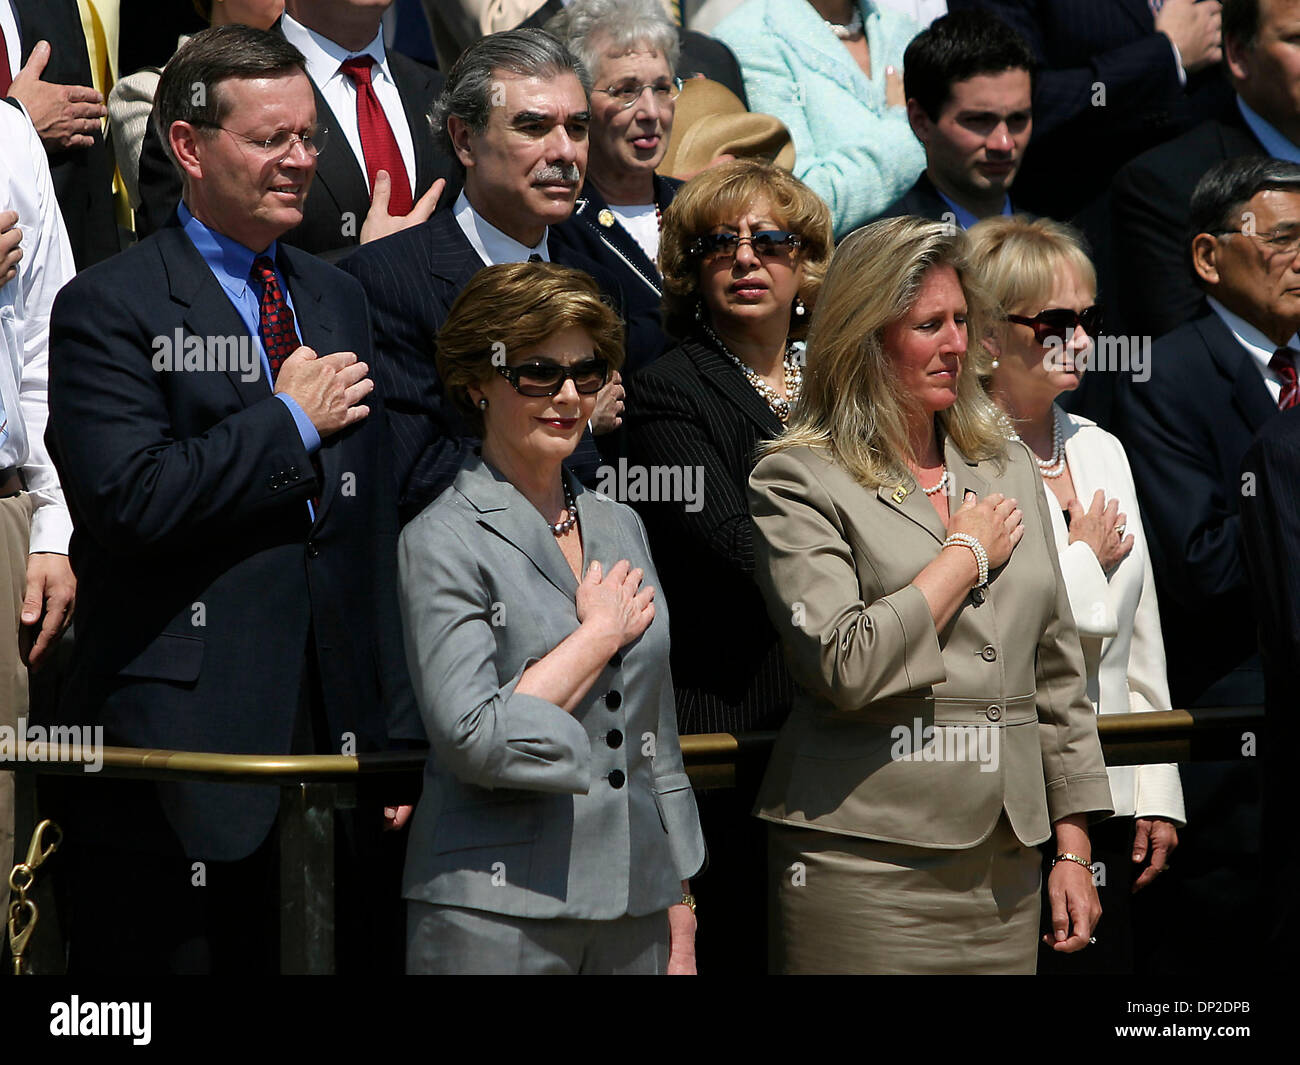 May 29, 2006; Arlington, VA, USA; First Lady, LAURA BUSH and wife of Major General Swan attend the wreath laying ceremony at the Tomb of the Unknown Solider in Arlington Cemetery in honor of Memorial Day. Mandatory Credit: Photo by James Berglie/ZUMA Press. (©) Copyright 2006 by James Berglie Stock Photo